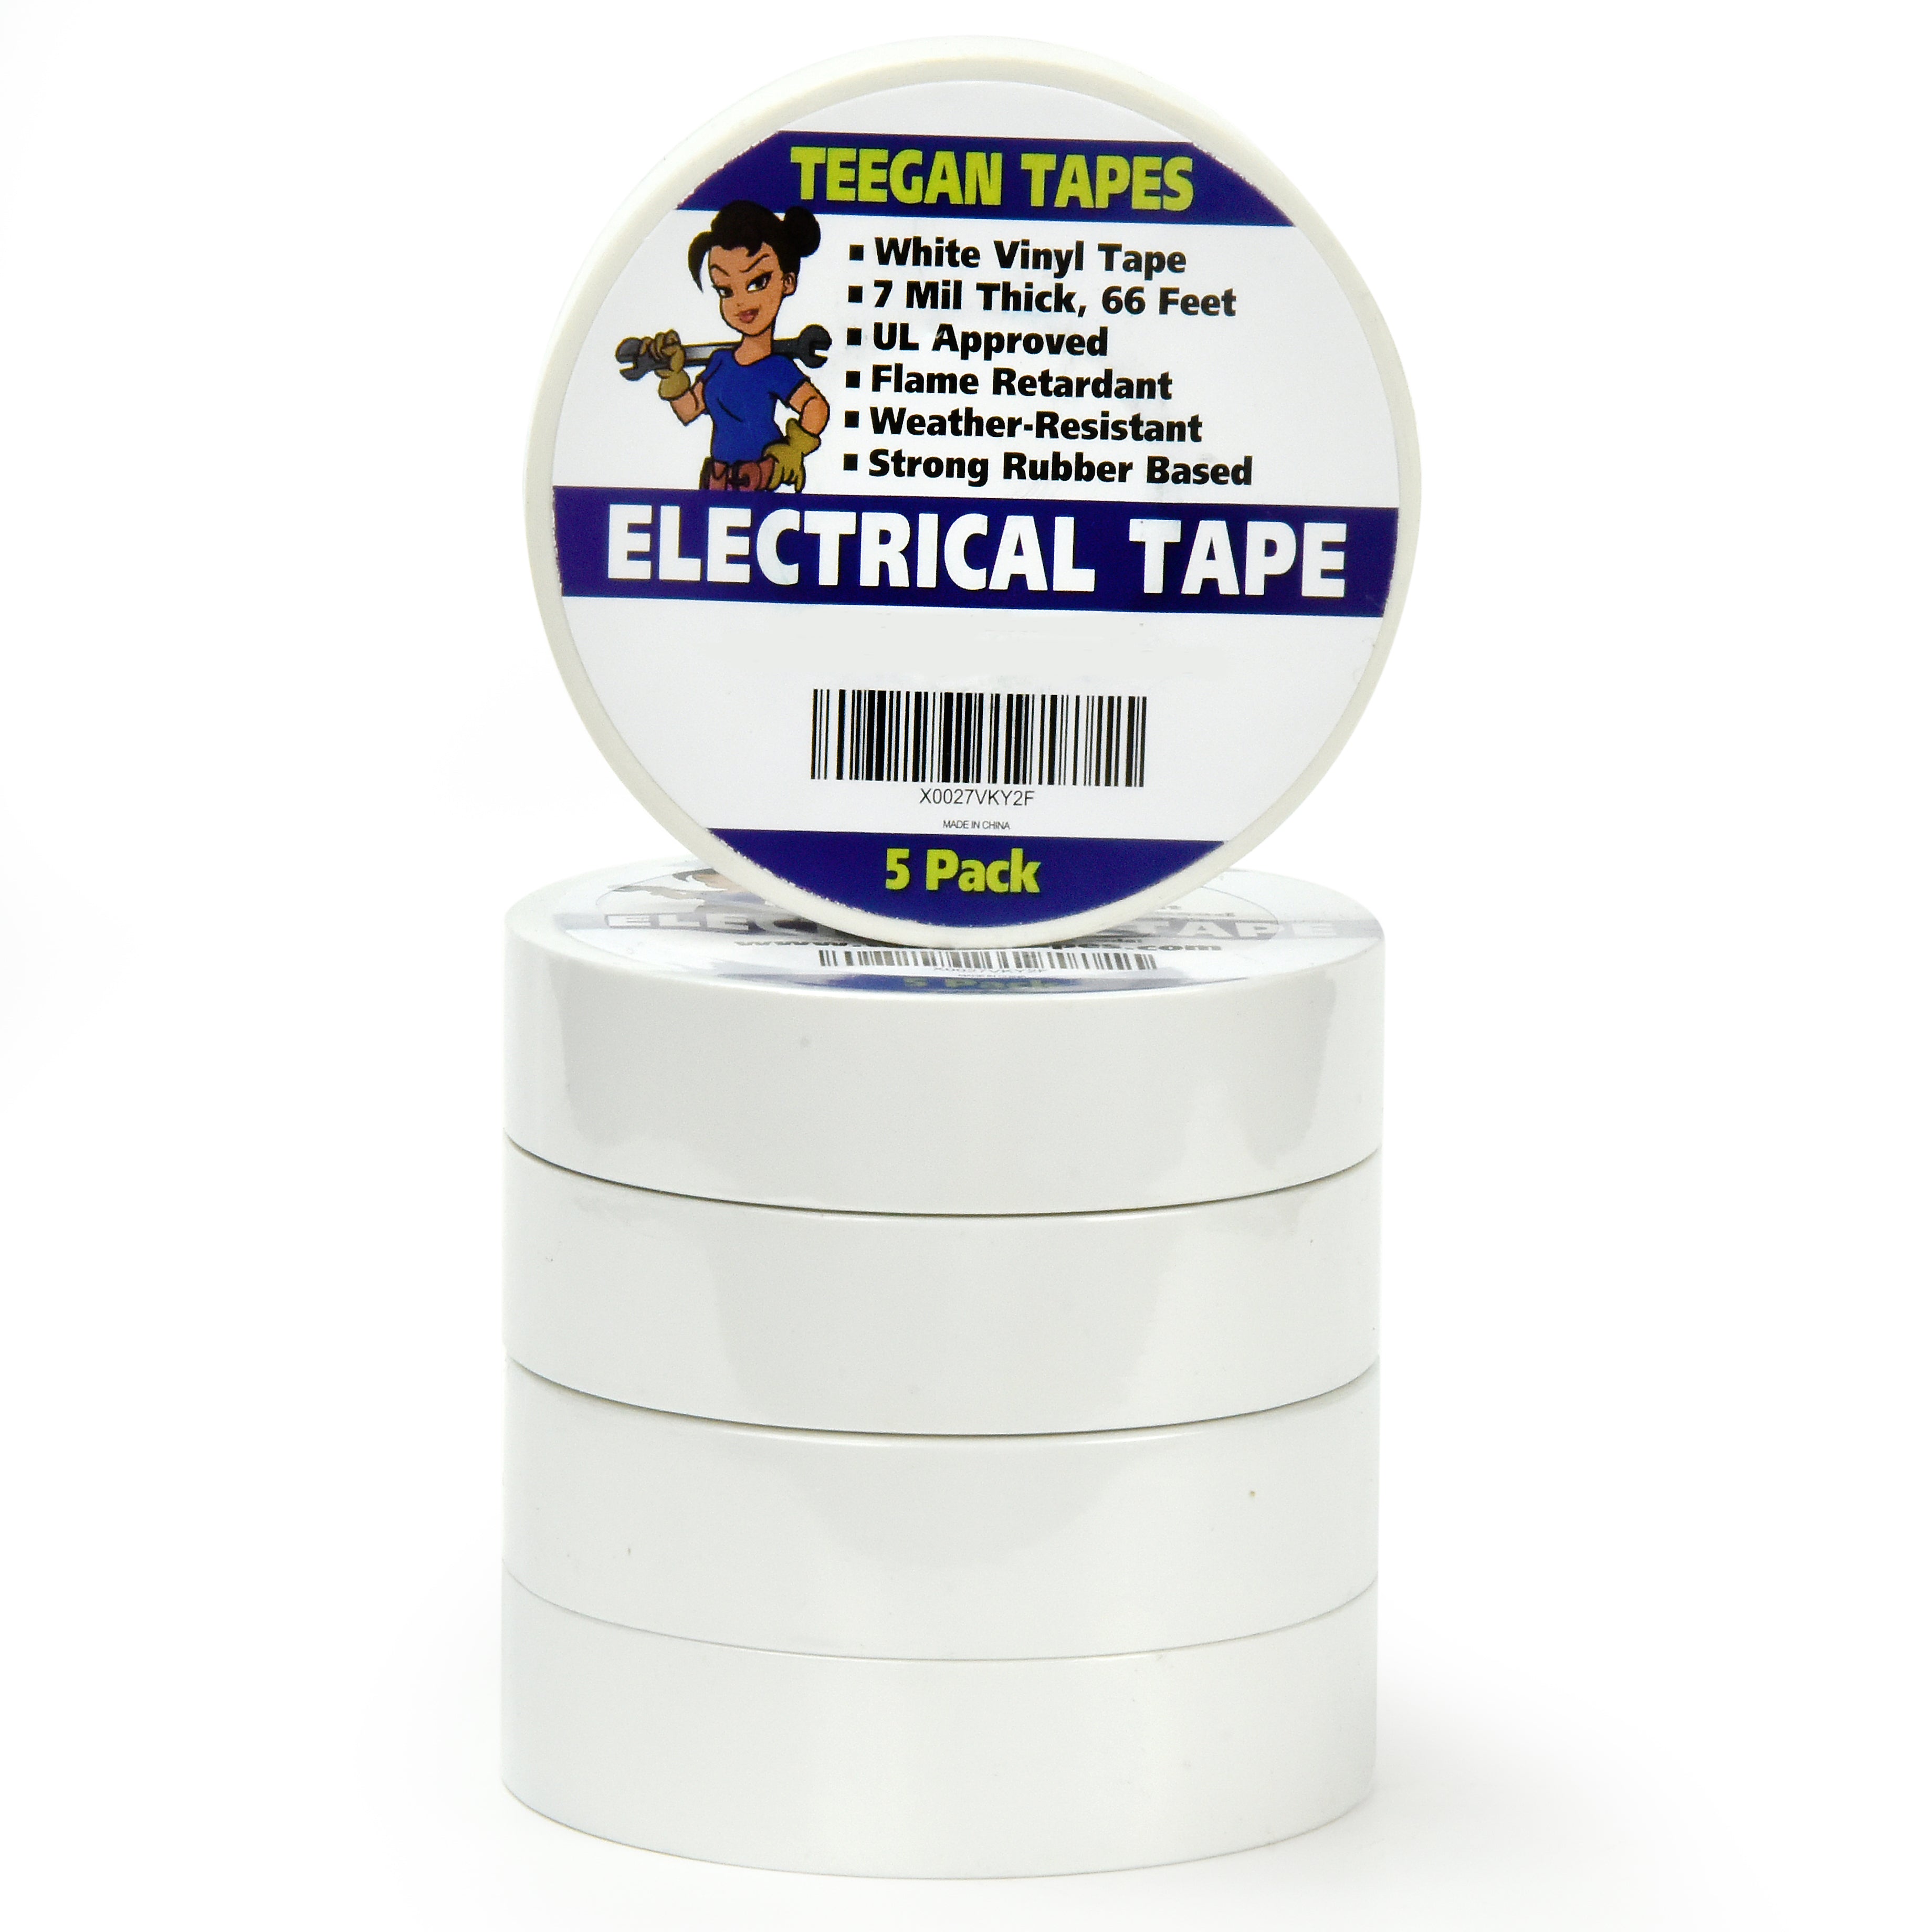 Gaffer Power White Electrical Tape - Vinyl Electric Tape (5 Pack) | 7 Mil Thick Vinyl Tape 3/4 inch Wide 66 Foot Long Roll | Strong Rubber